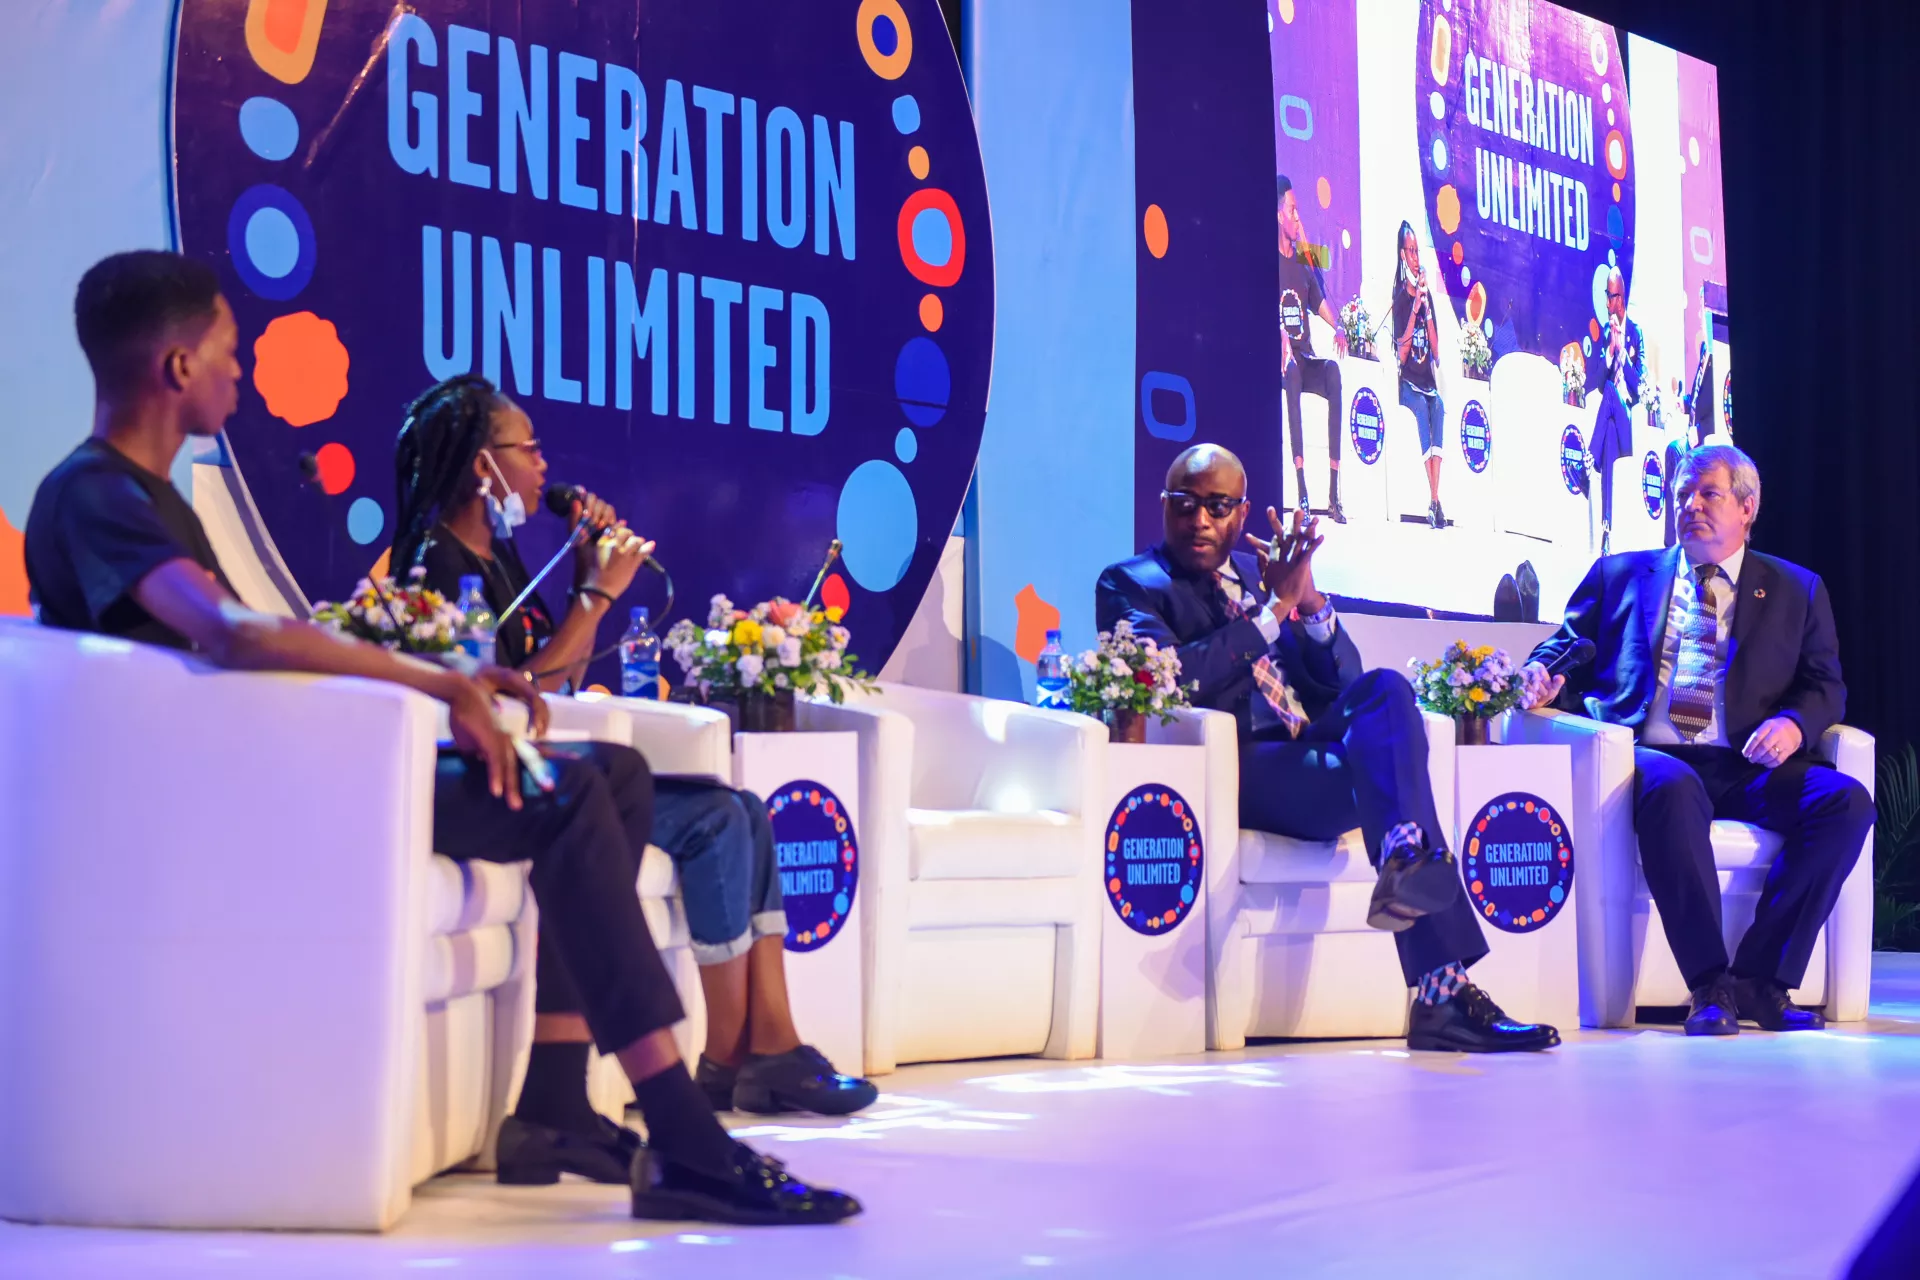 A group of young people shown in a panel discussion with decision-makers on stage